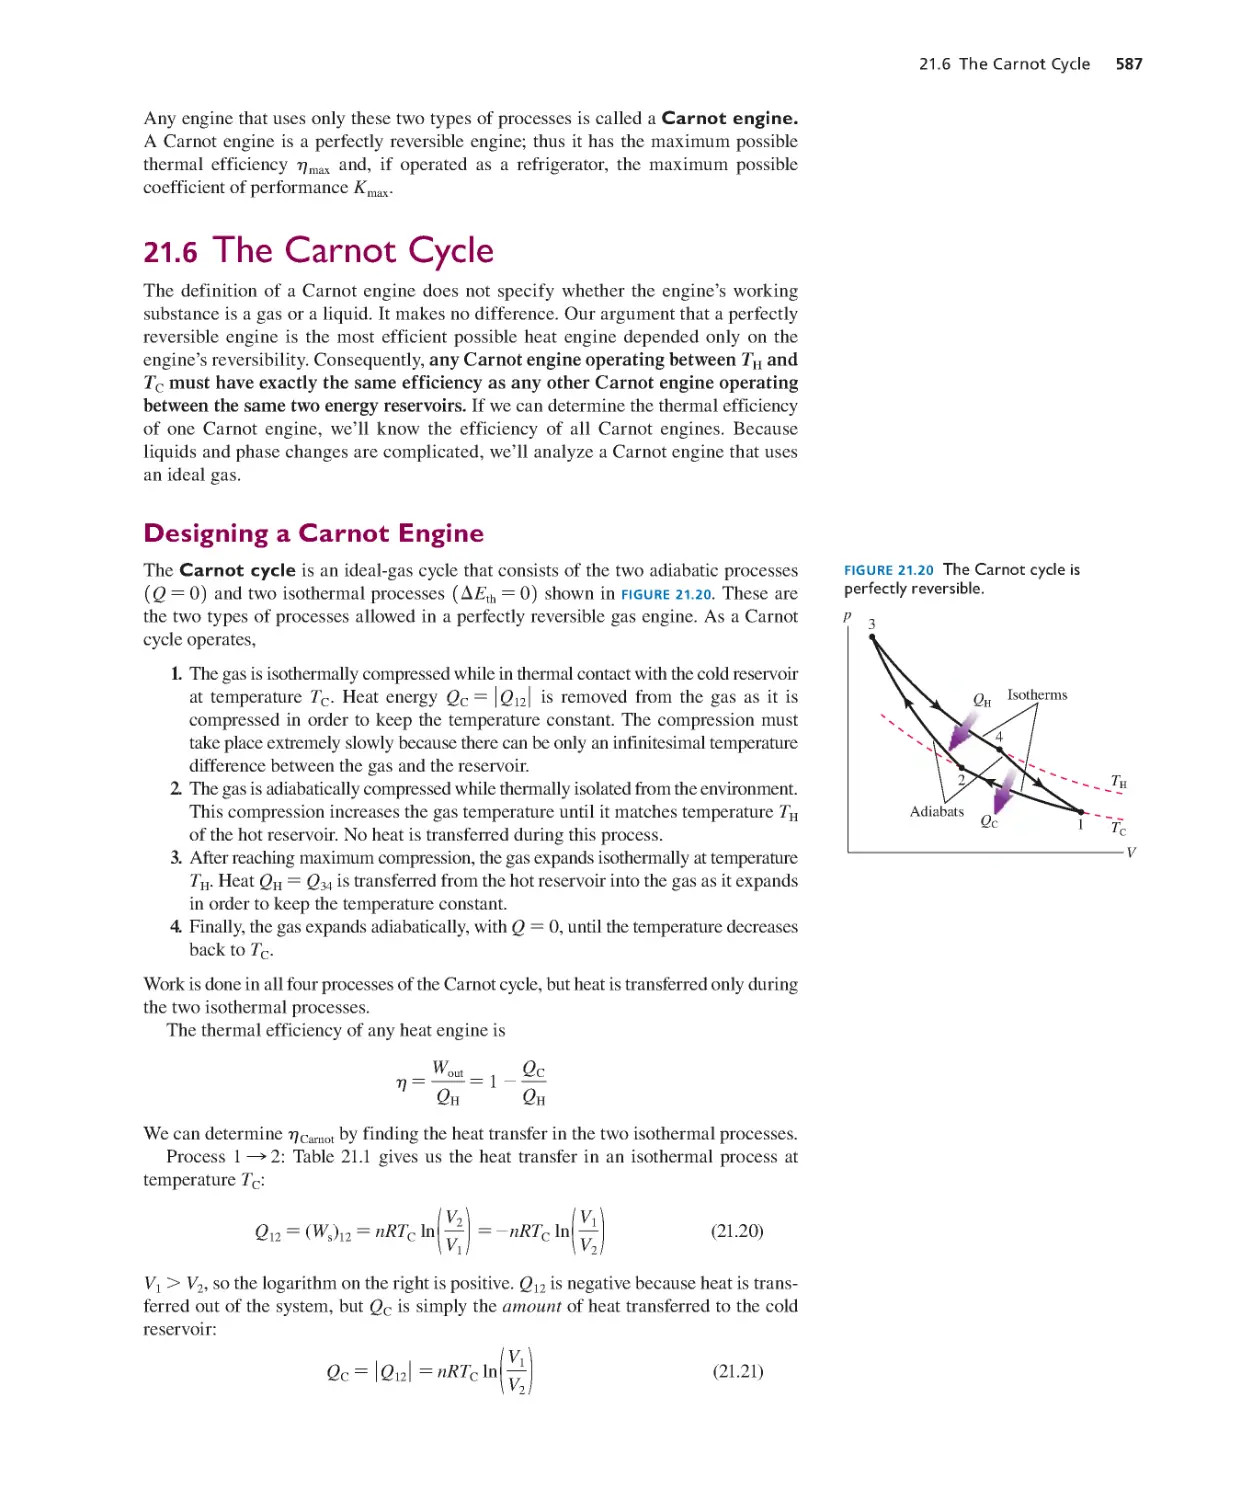 21.6. The Carnot Cycle